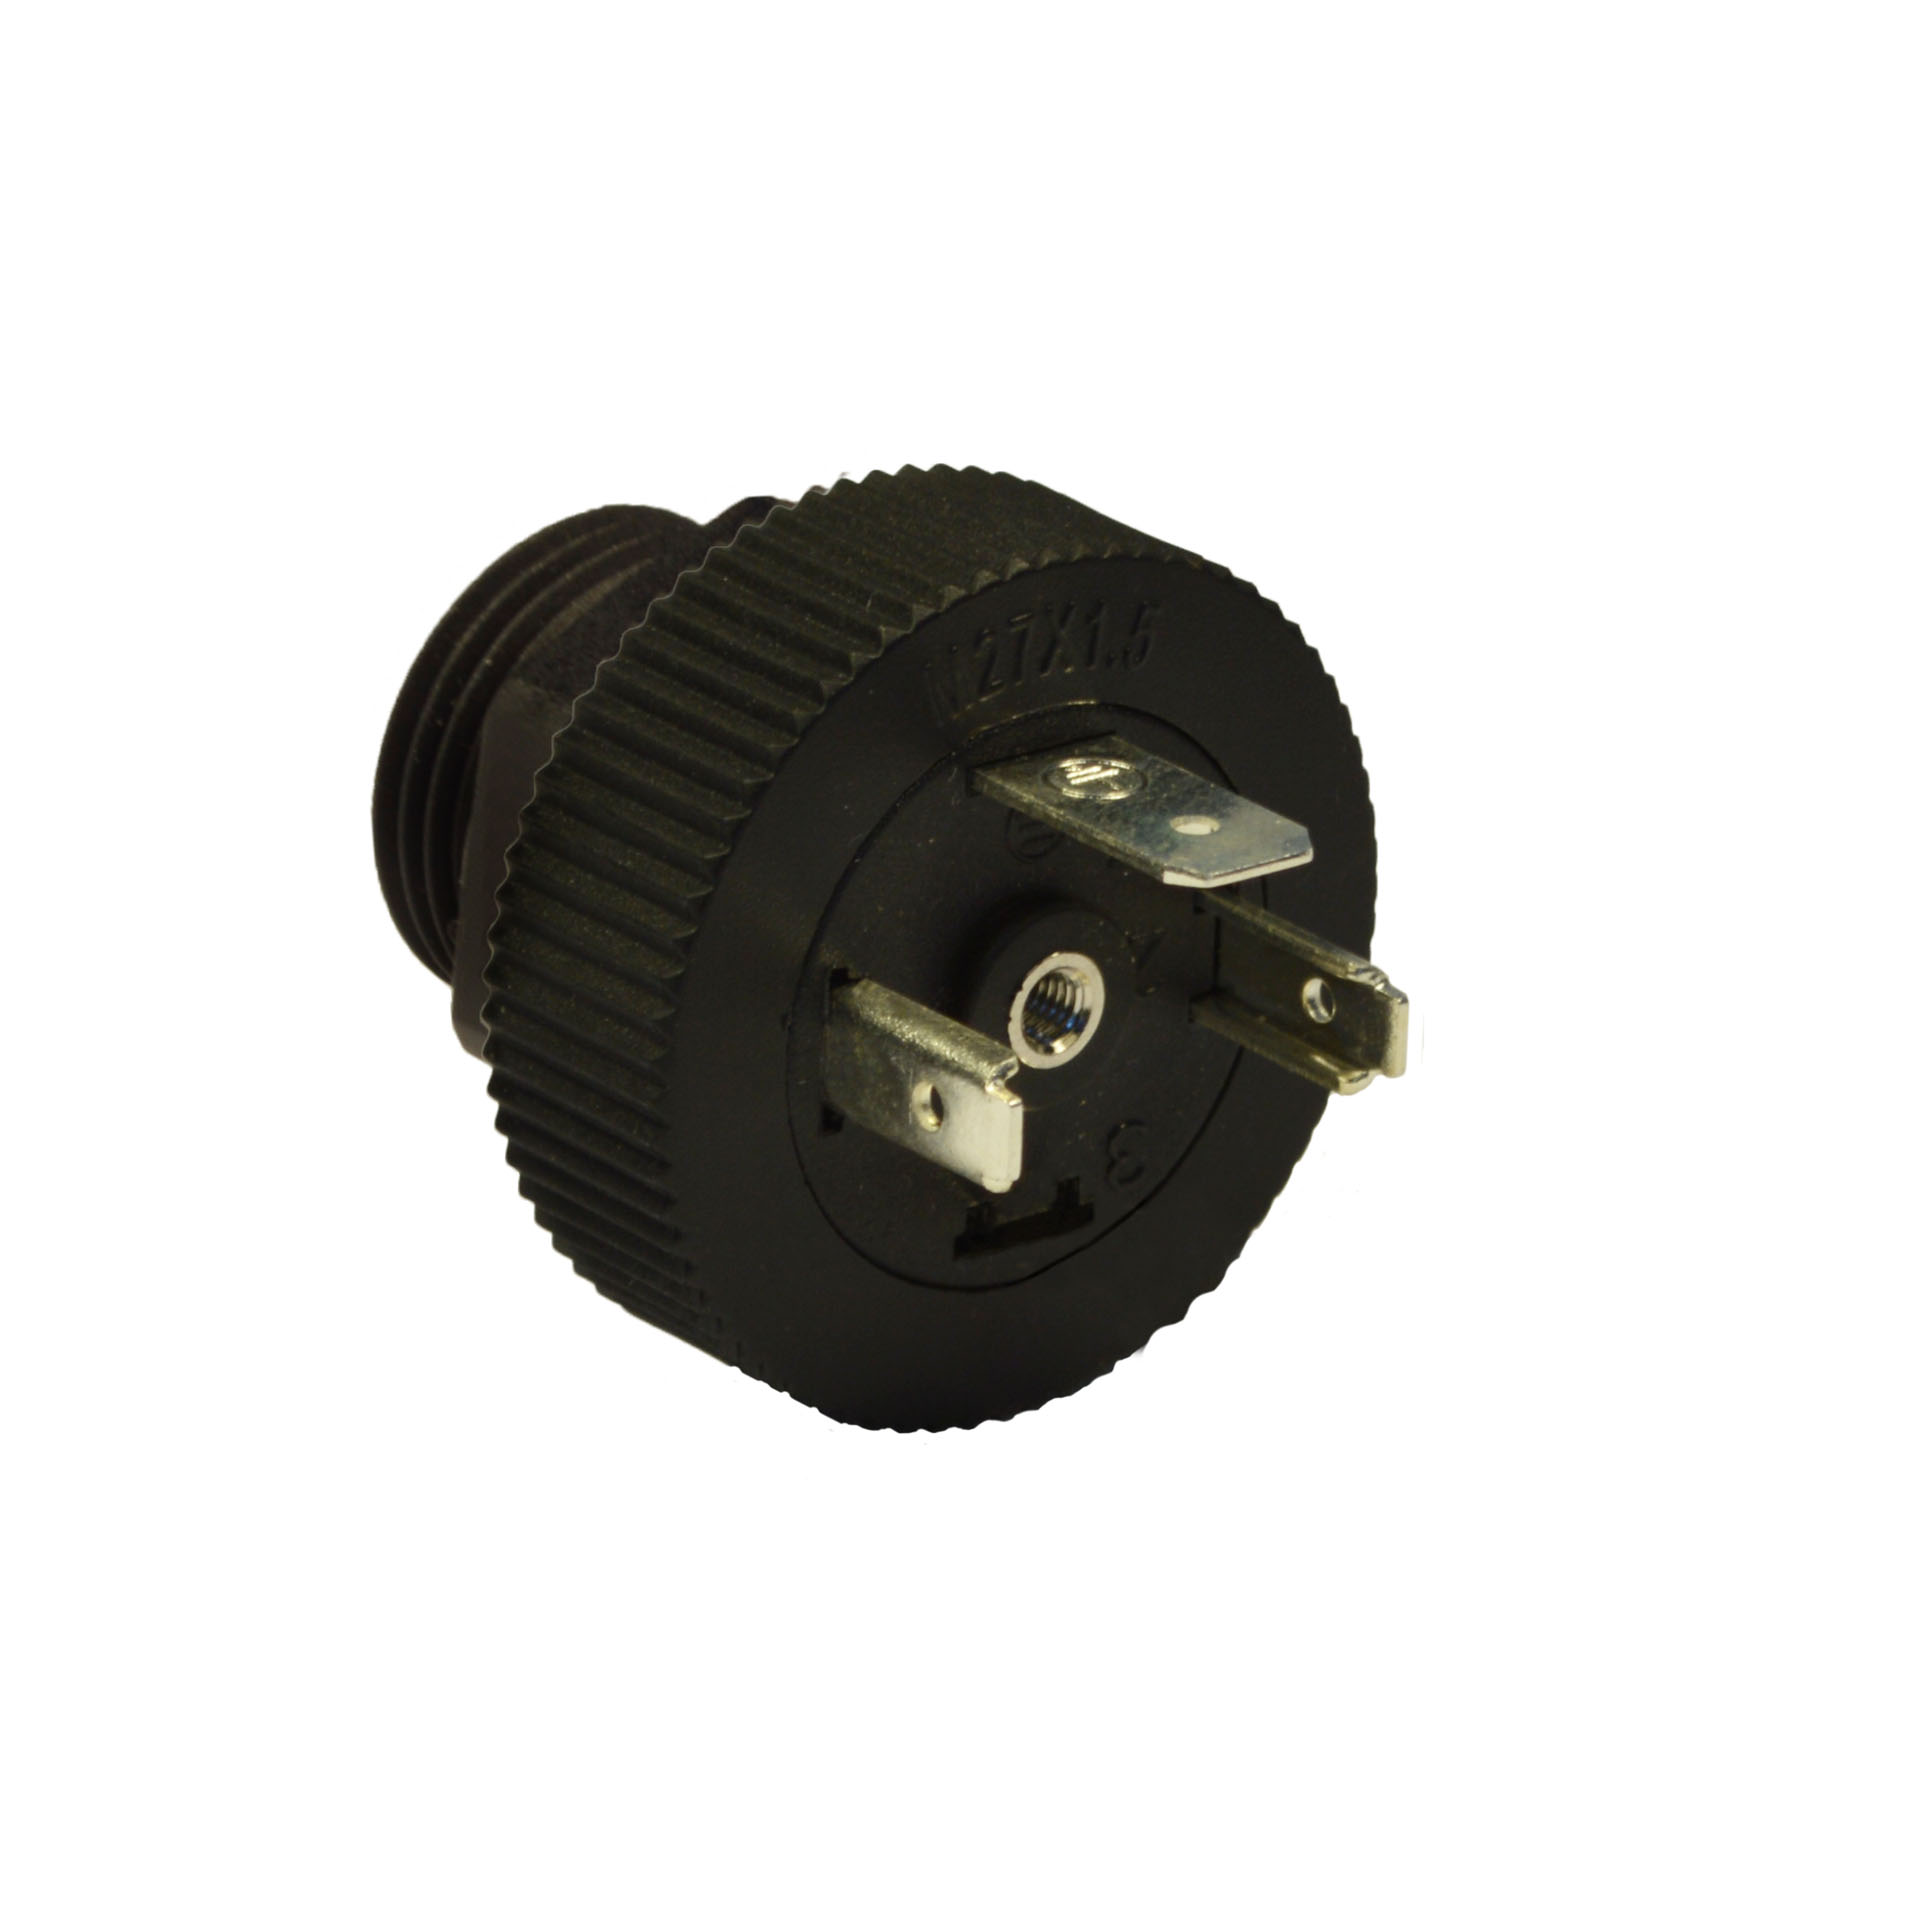 EN175301-803(typeC)Round BASE,2p+PE,250VAC/300VDC,M27x1,5 fix nut+M20 adaptor,M3 central nut OPEN